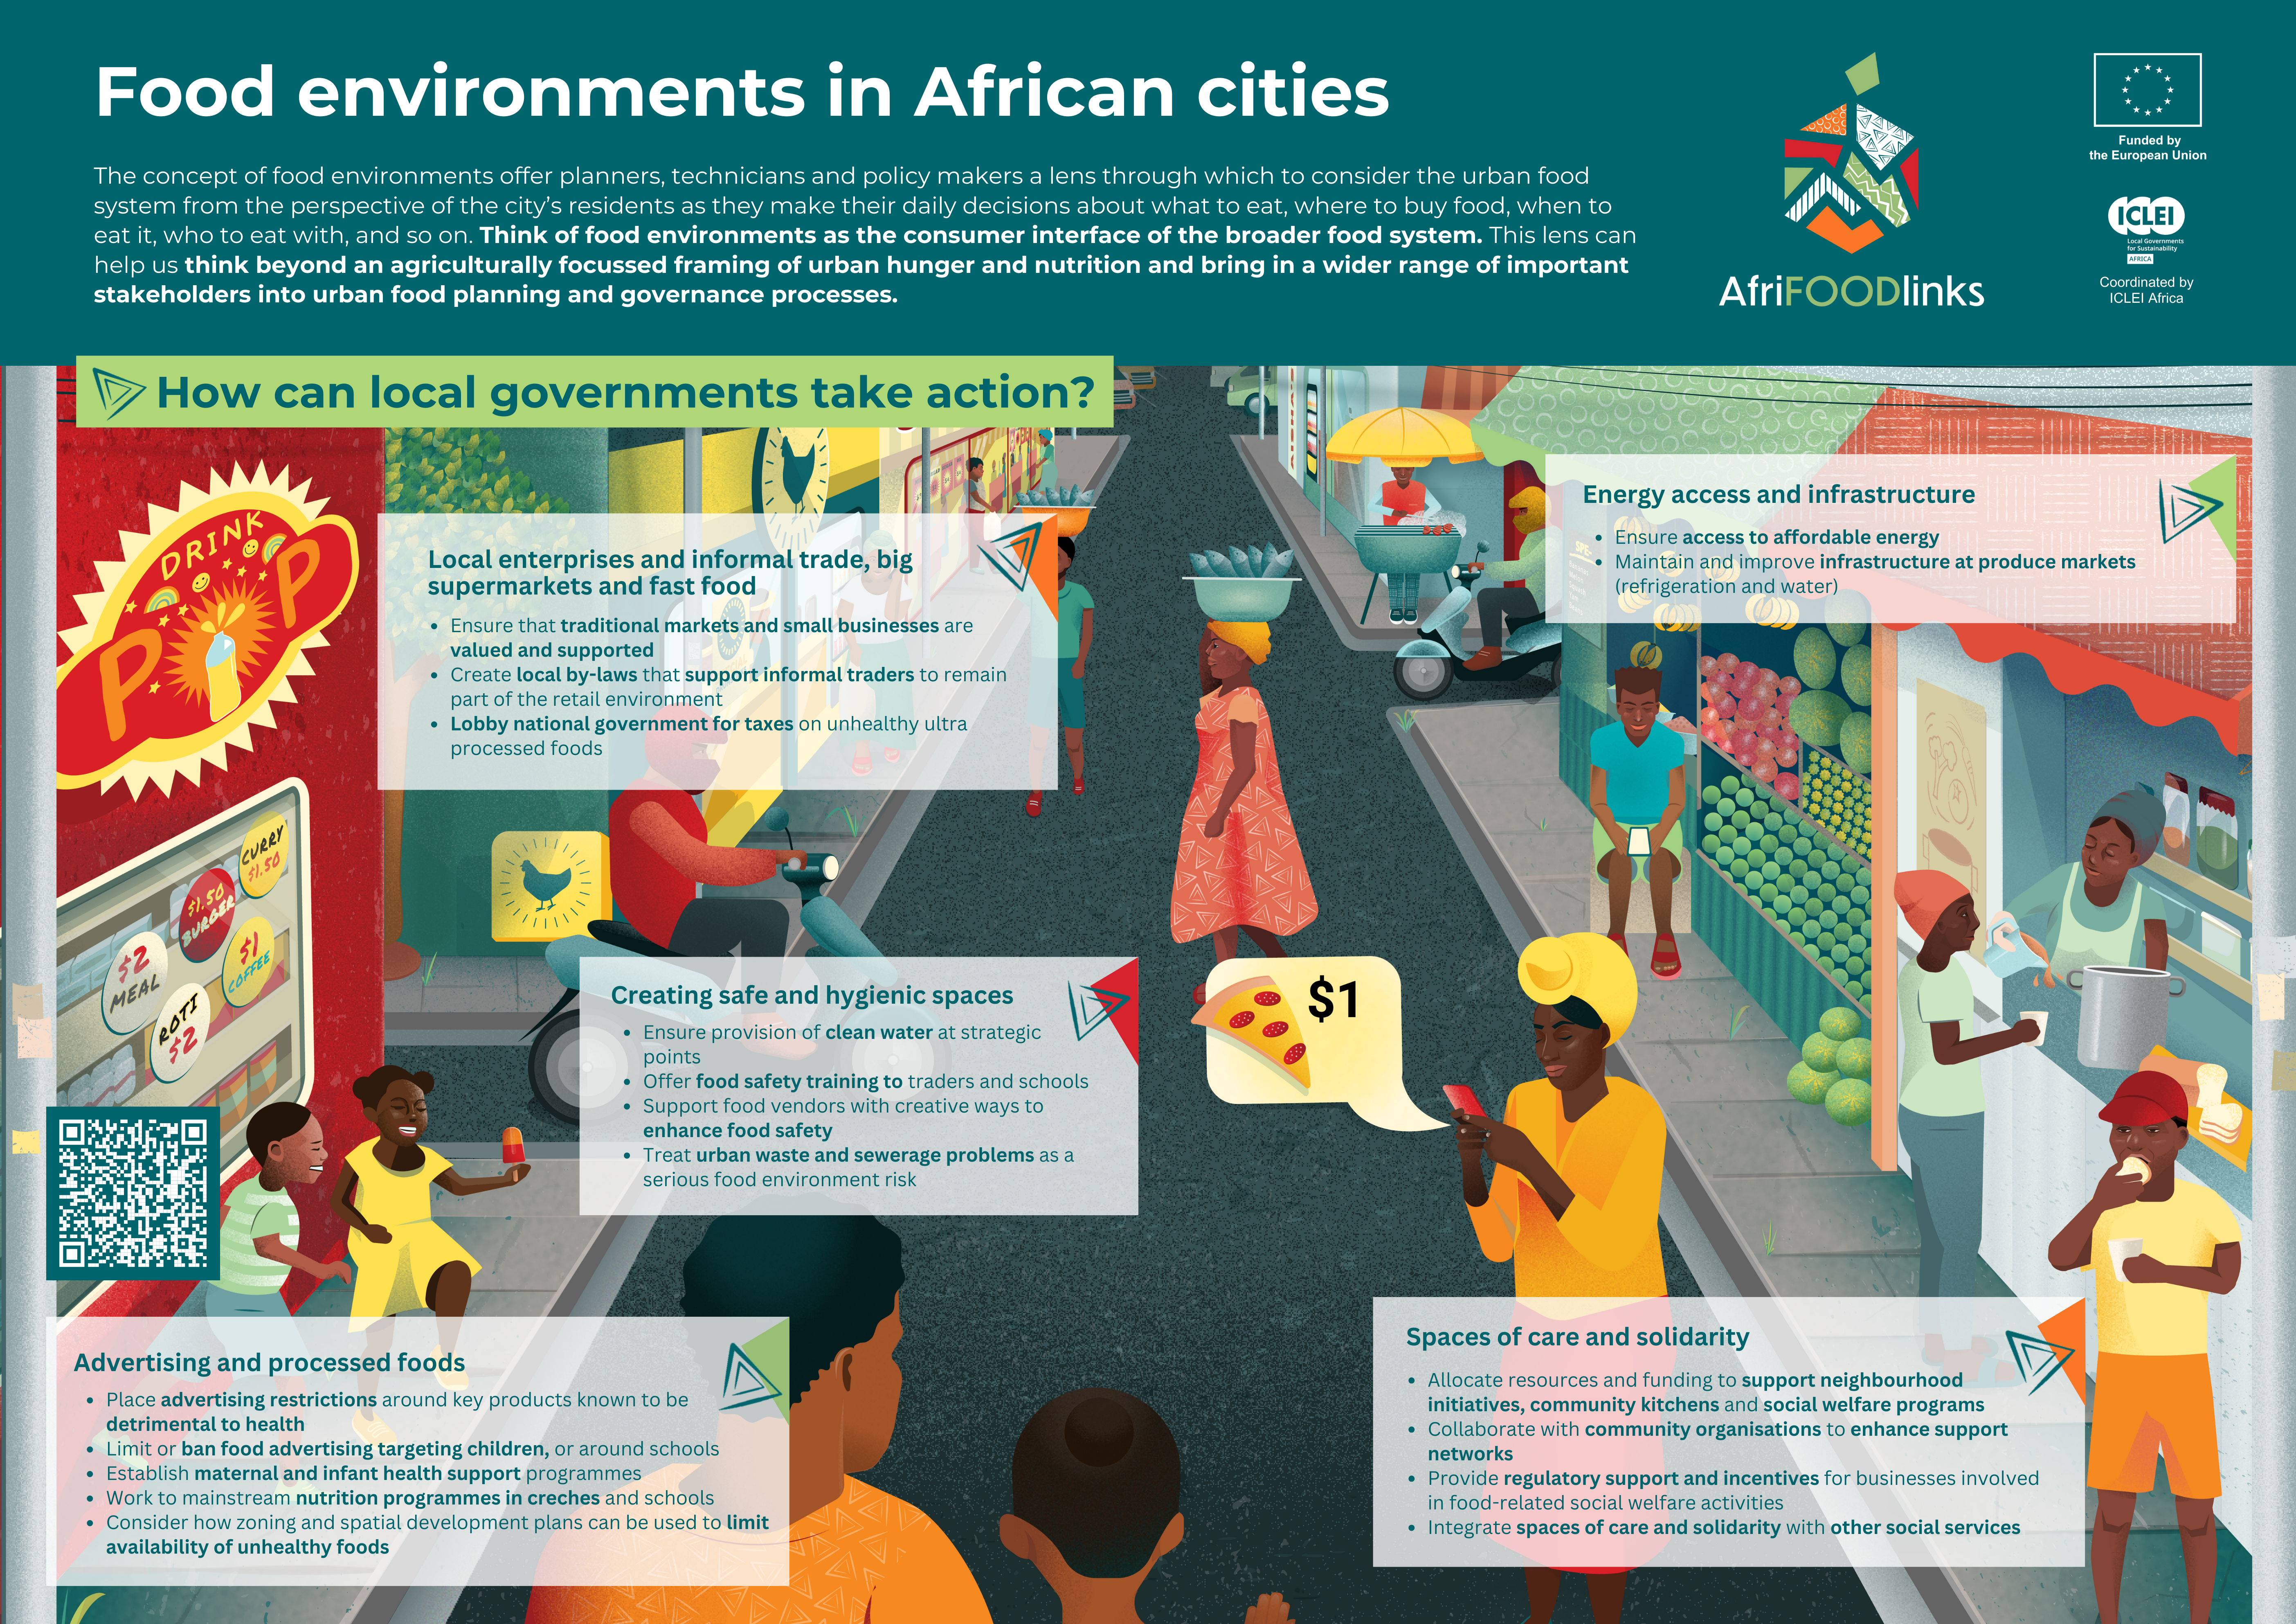 Food environments in African cities